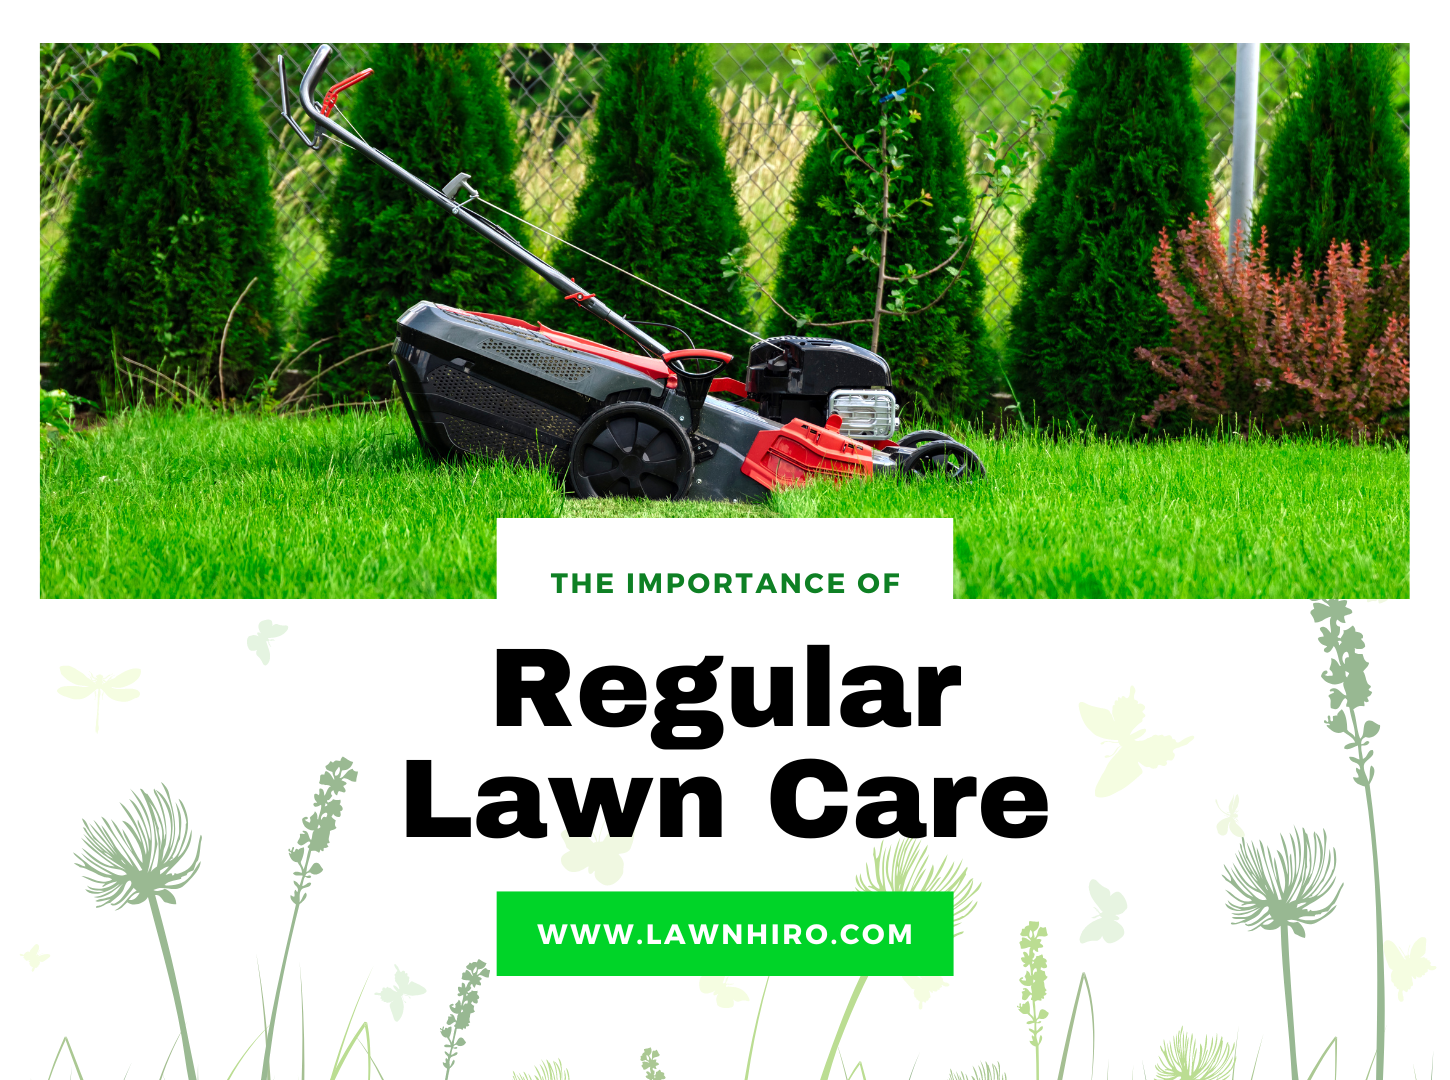 Featured image for “The Importance of Regular Lawn Care”